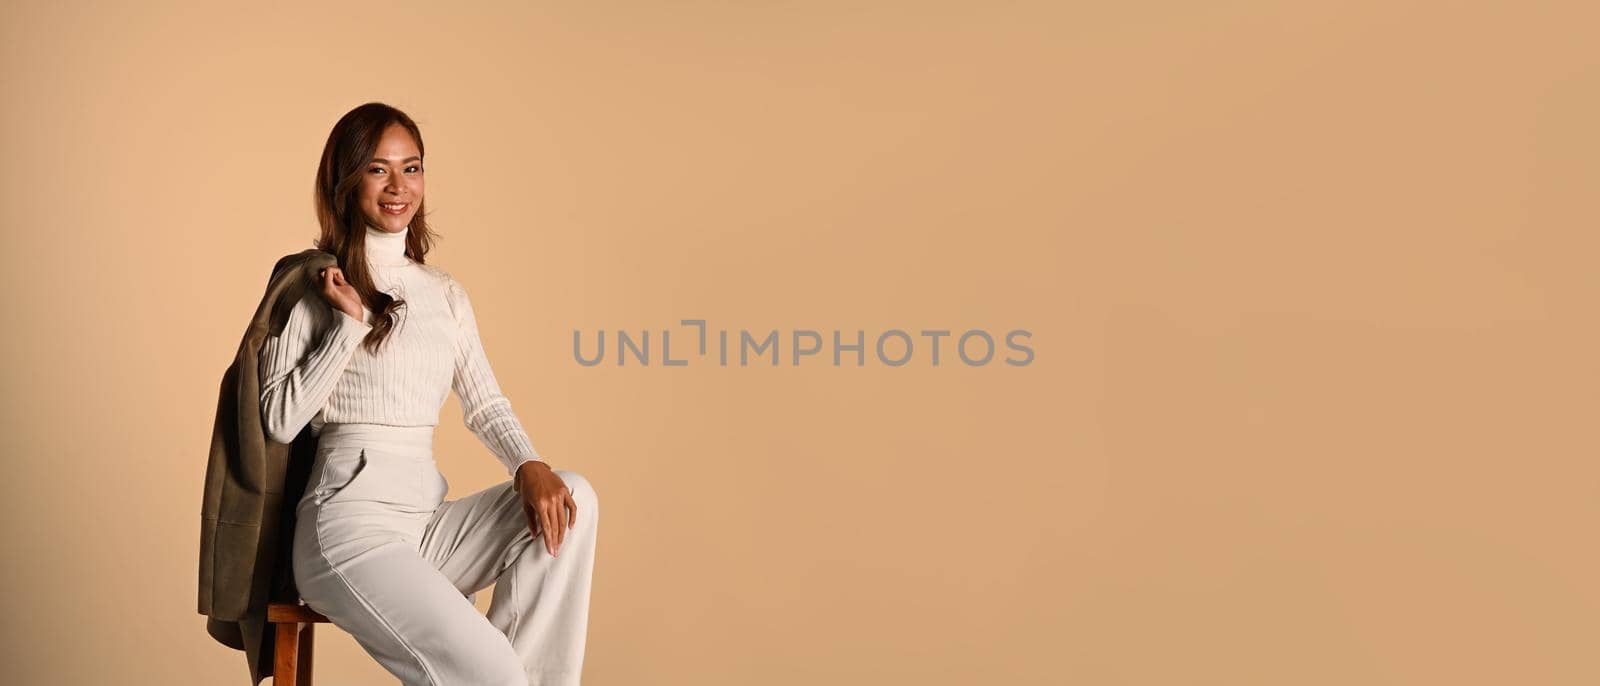 Stylish young woman with trench coat on shoulder looking at camera, sitting on beige background with copy space for your advertise text.